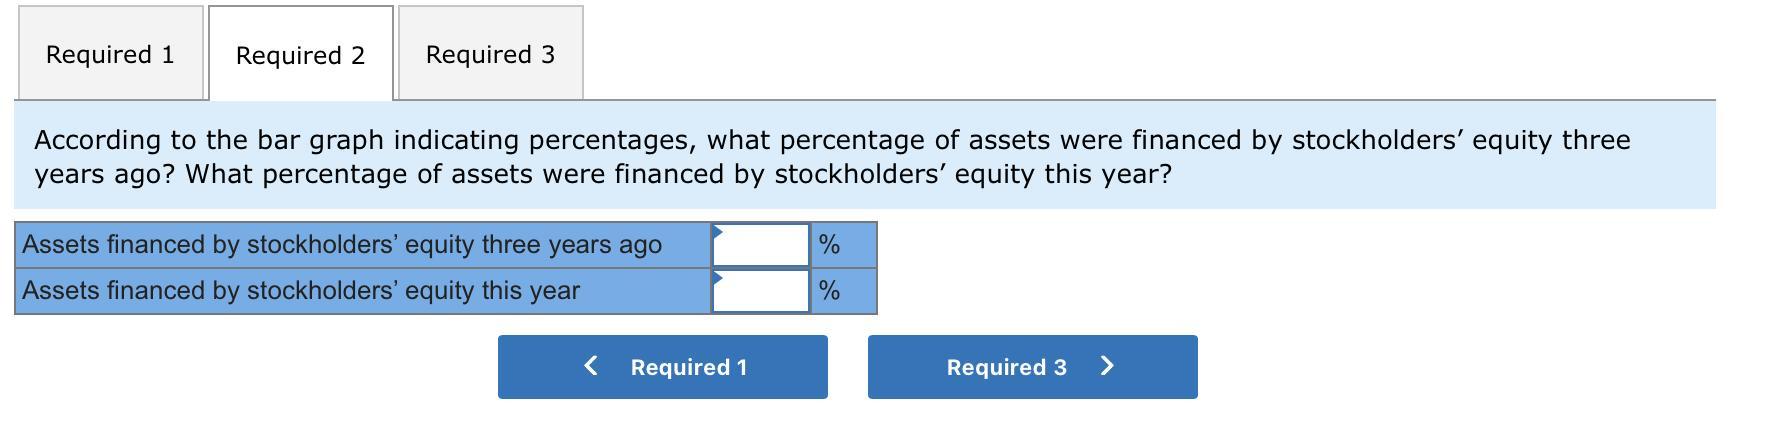 According to the bar graph indicating percentages, what percentage of assets were financed by stockholders equity three year